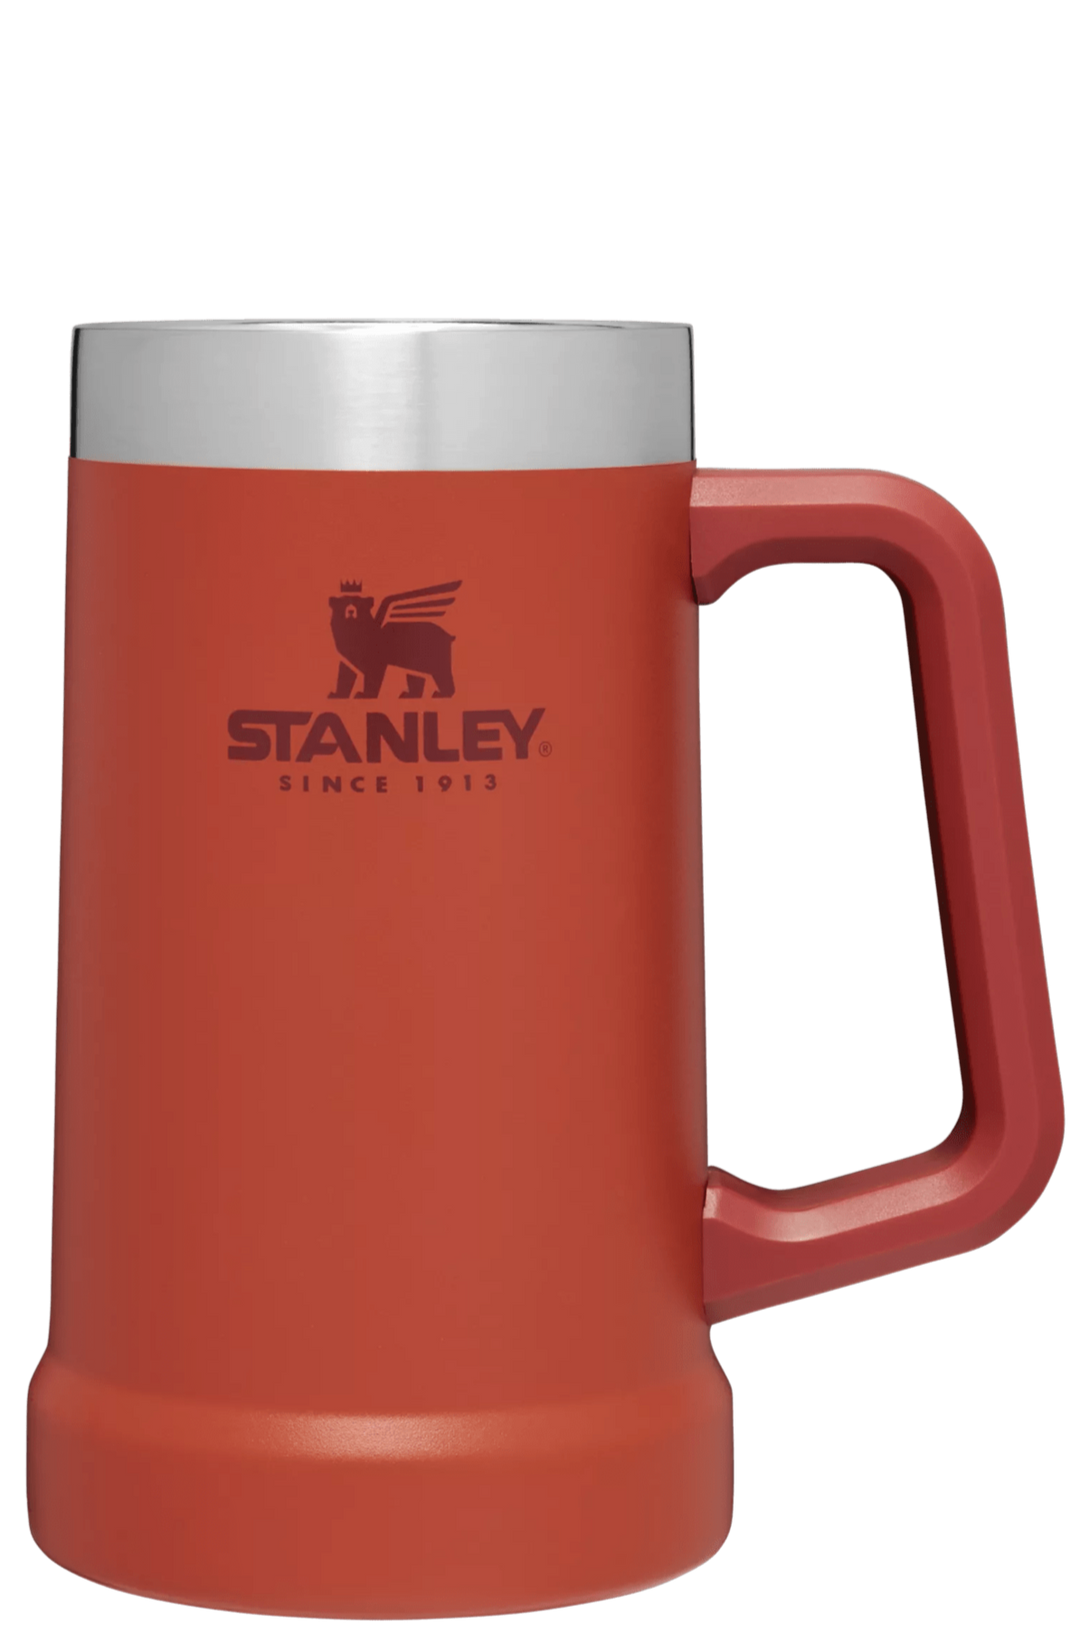 Stanley beer stein 7L Available in stock 5hrs - cold 20hrs